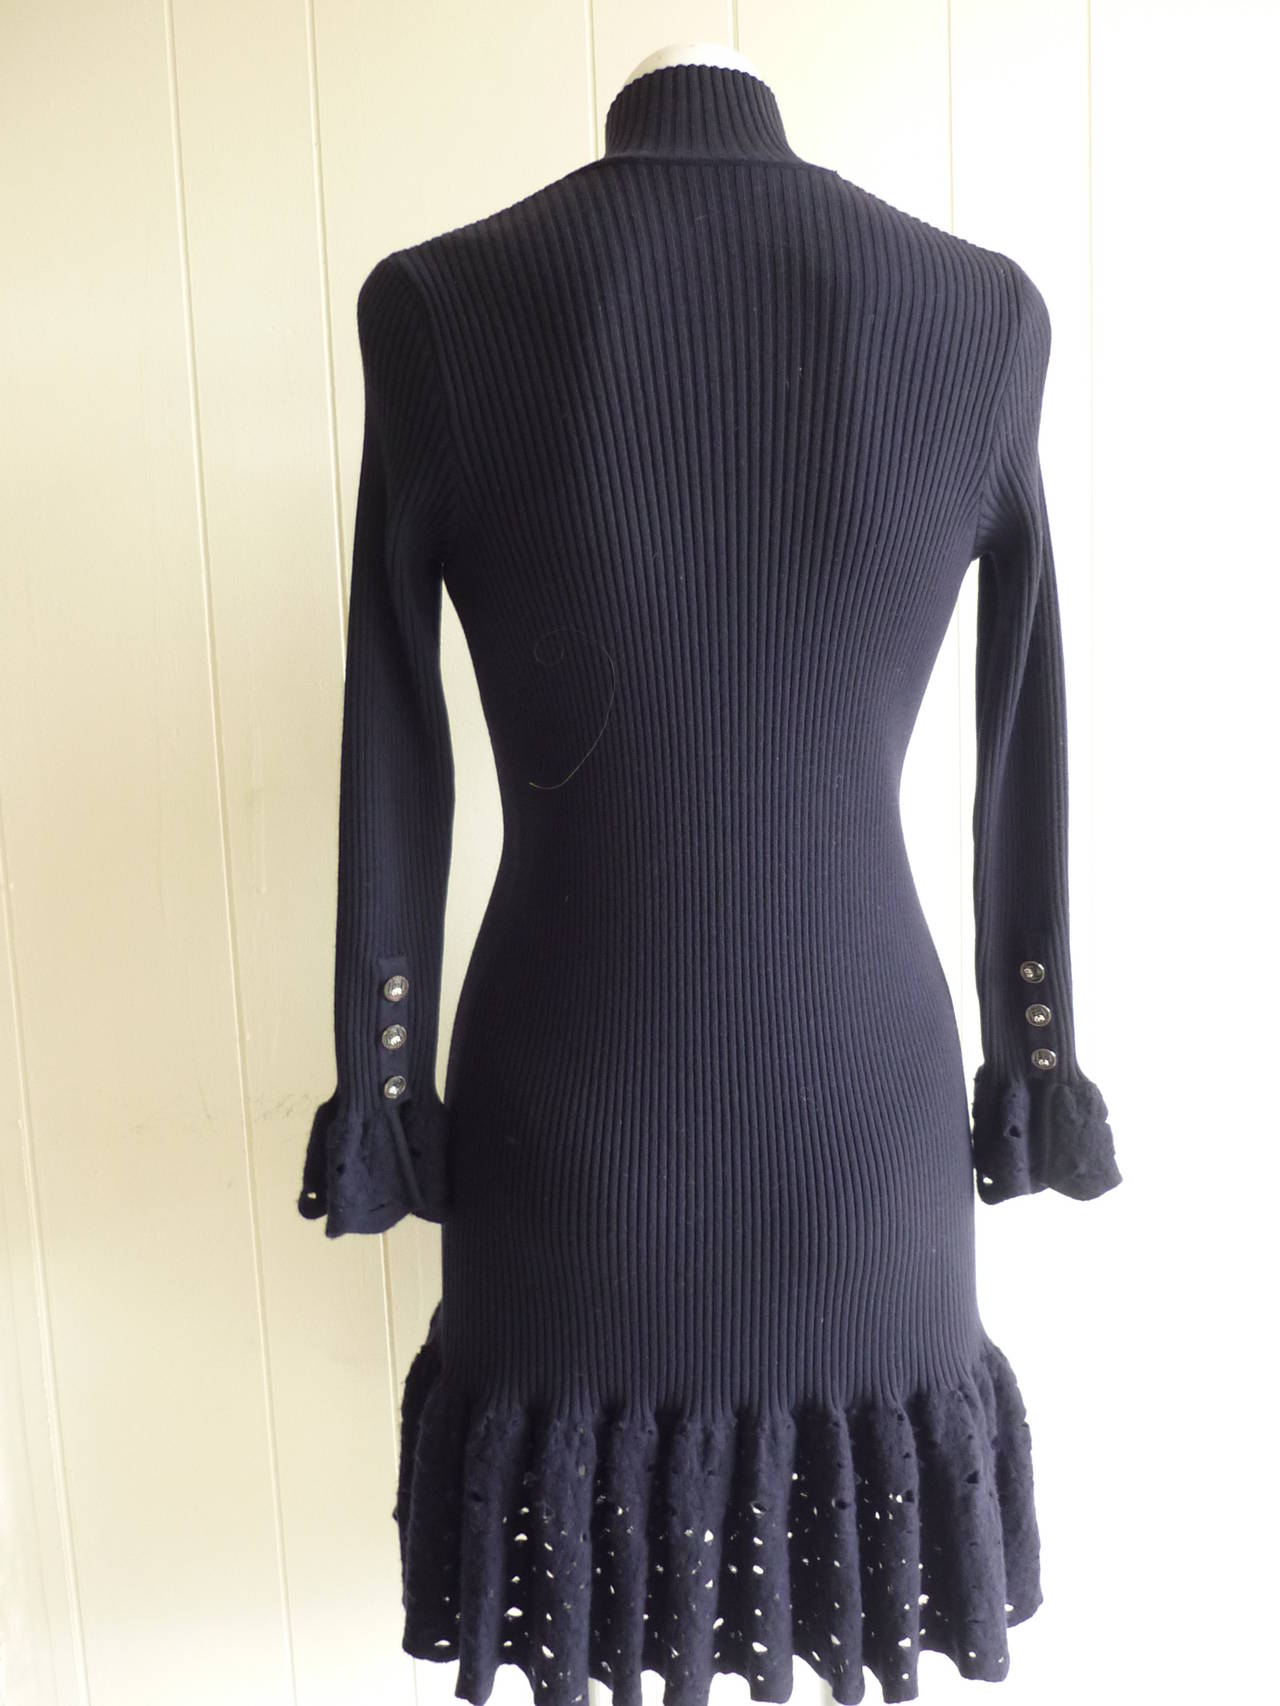 Absolutely beautiful dress of ribbed wool, it has a high collar and ten rare white elephant buttons from the neck to the bottom of the dress. But that is not all, the cuffs and hems are wool crochet, and the cuffs each sport three white elephant